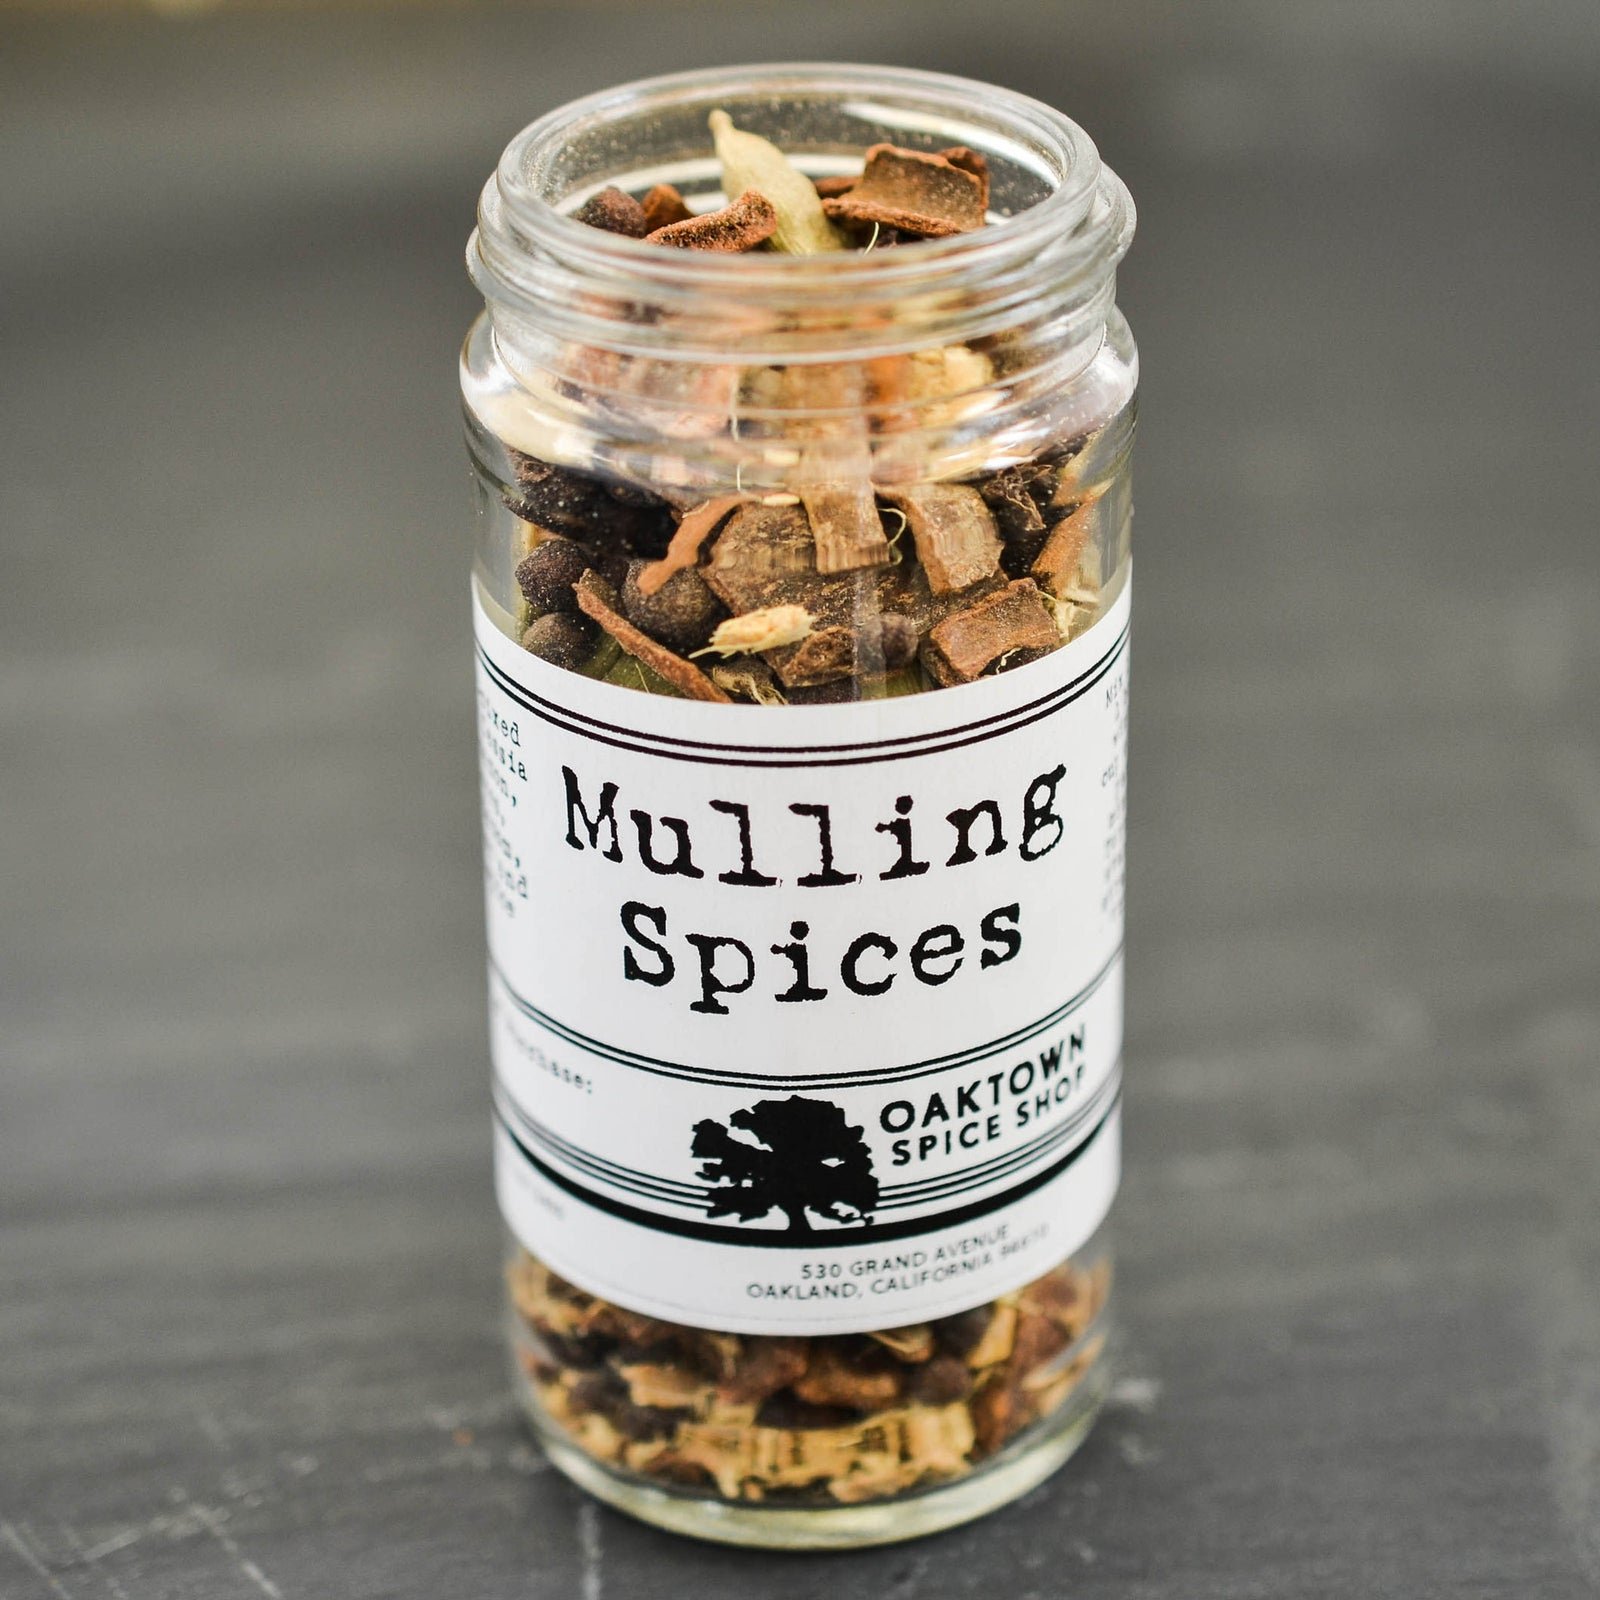 02 Mulling Spices - Nothing compliments the crisp autumn air like the aroma of a warm, bubbling pot of mulling spices. Hand-blended in Oakland, Oaktown Spice Shop’s rich mix of allspice, ginger, cardamom, cinnamon and cloves will keep you warm inside and out. SHOP NOW >” loading=”lazy”></noscript><br/><img decoding=